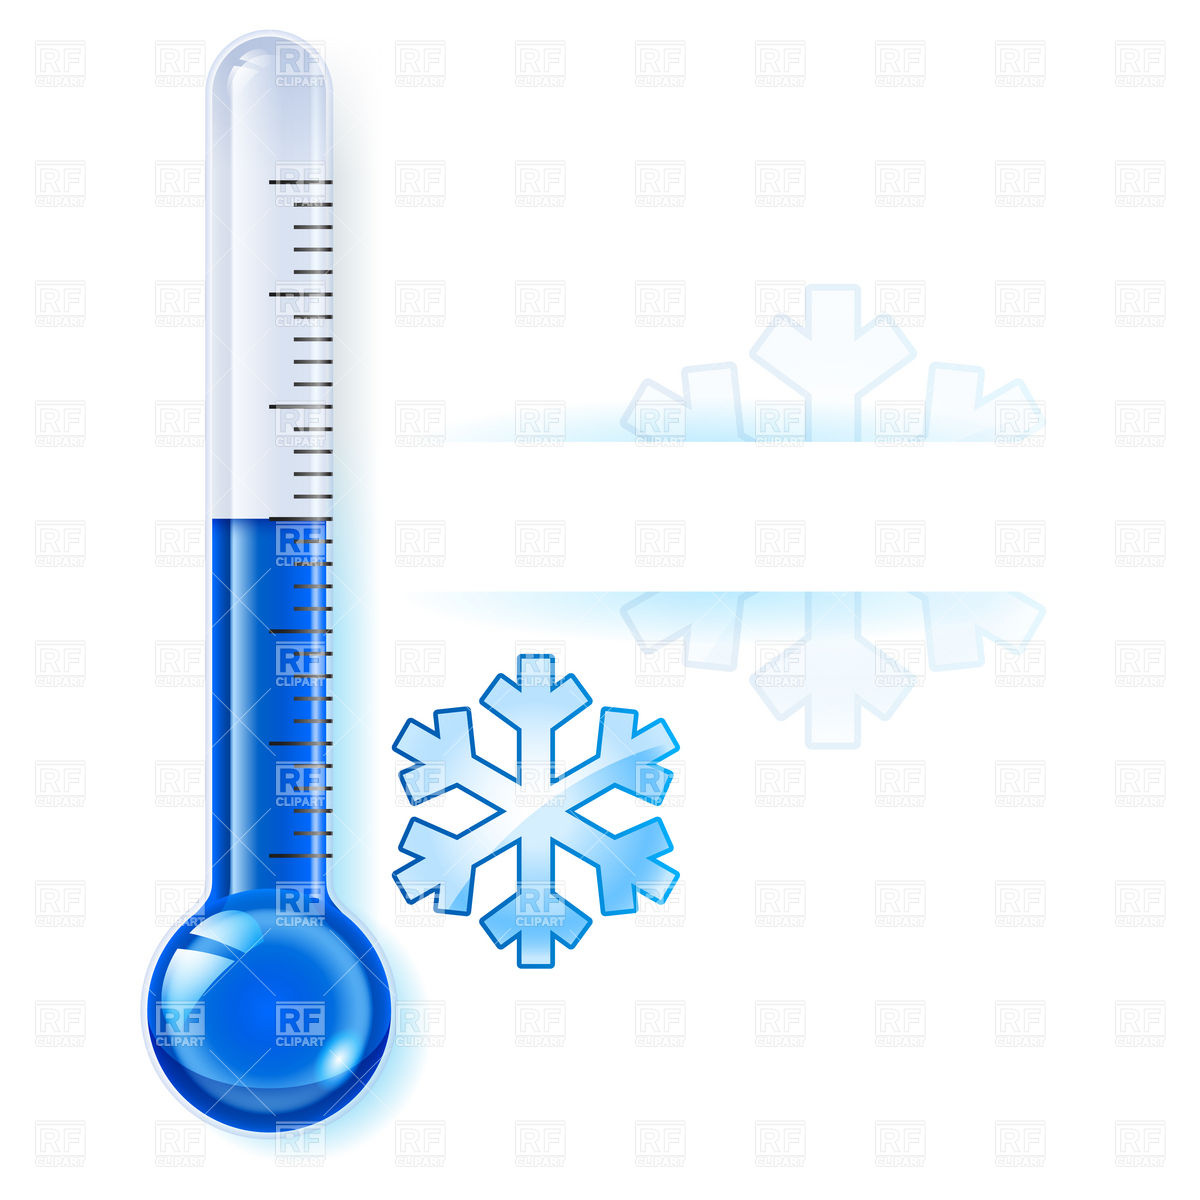 Thermometer Icons By Seasons   Winter 6891 Objects Download Royalty